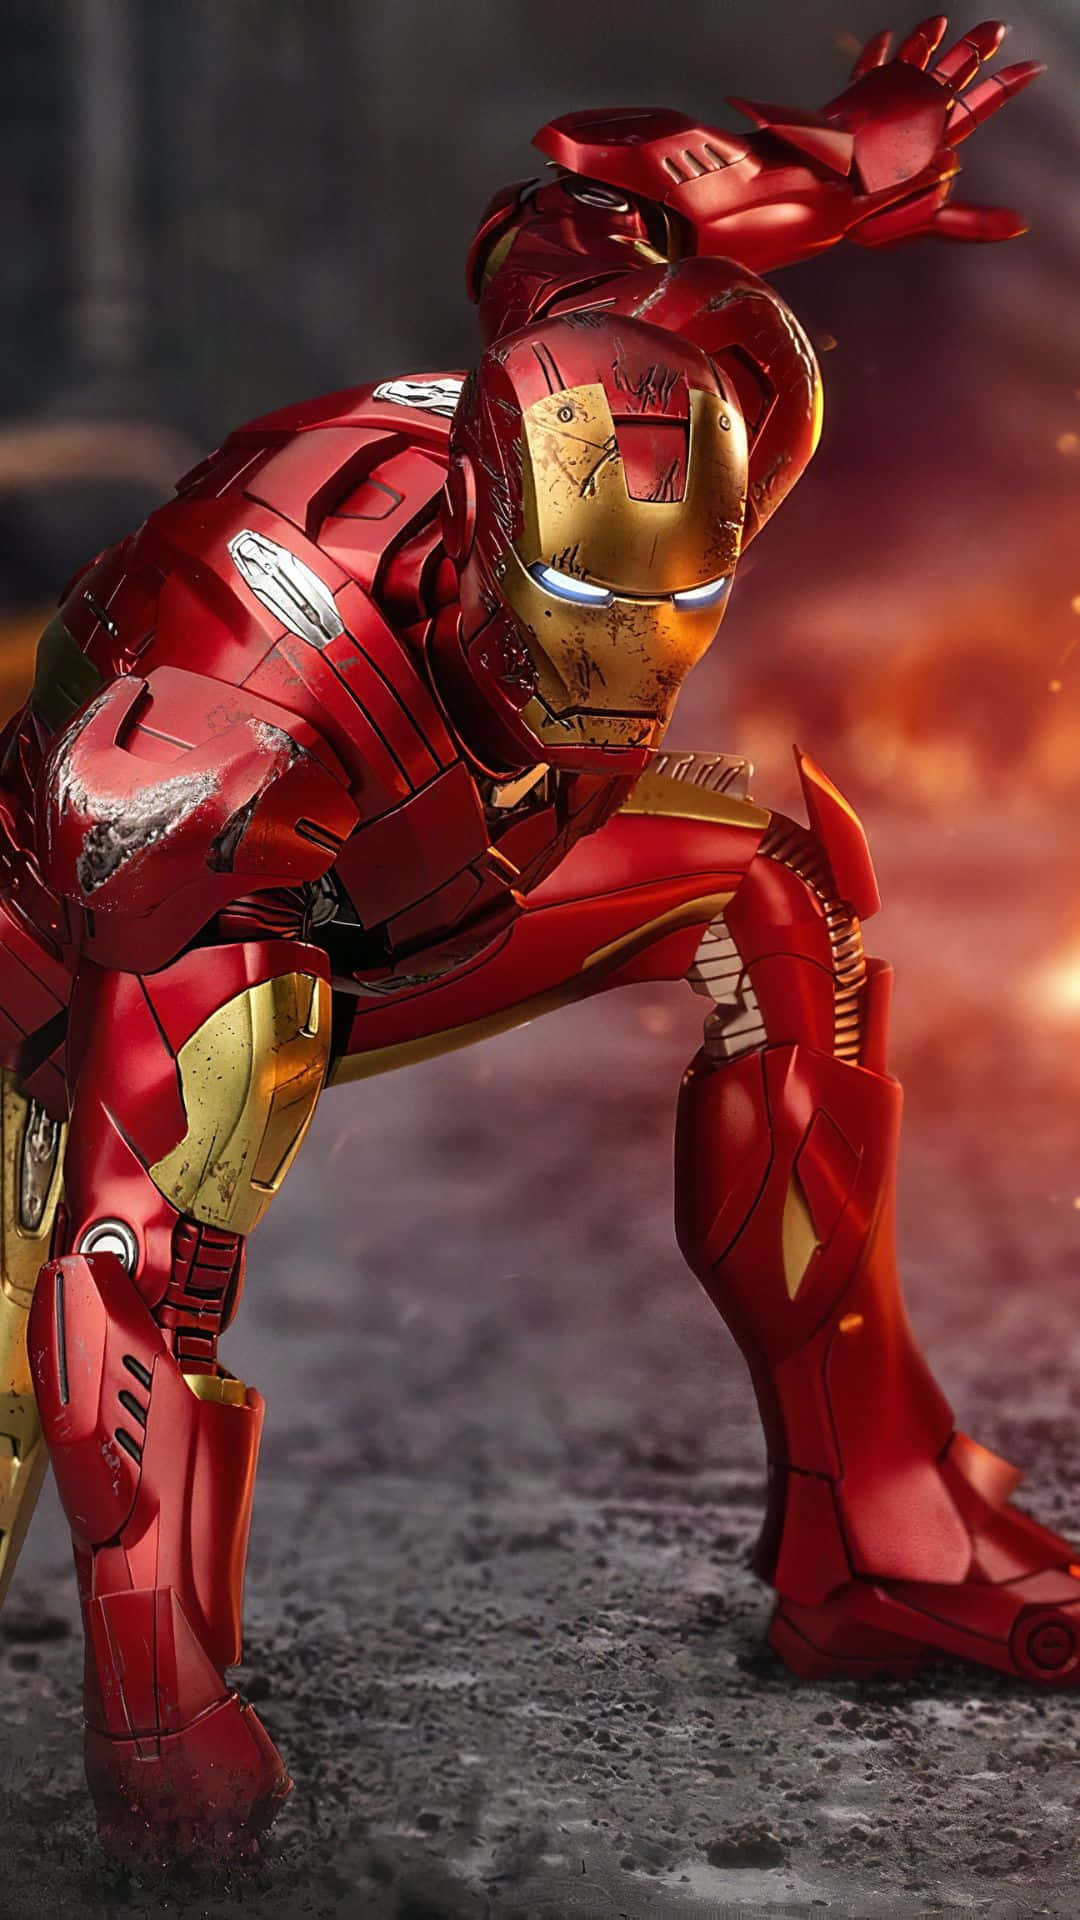 Stage your own Iron Man adventure with Android Iron Man!